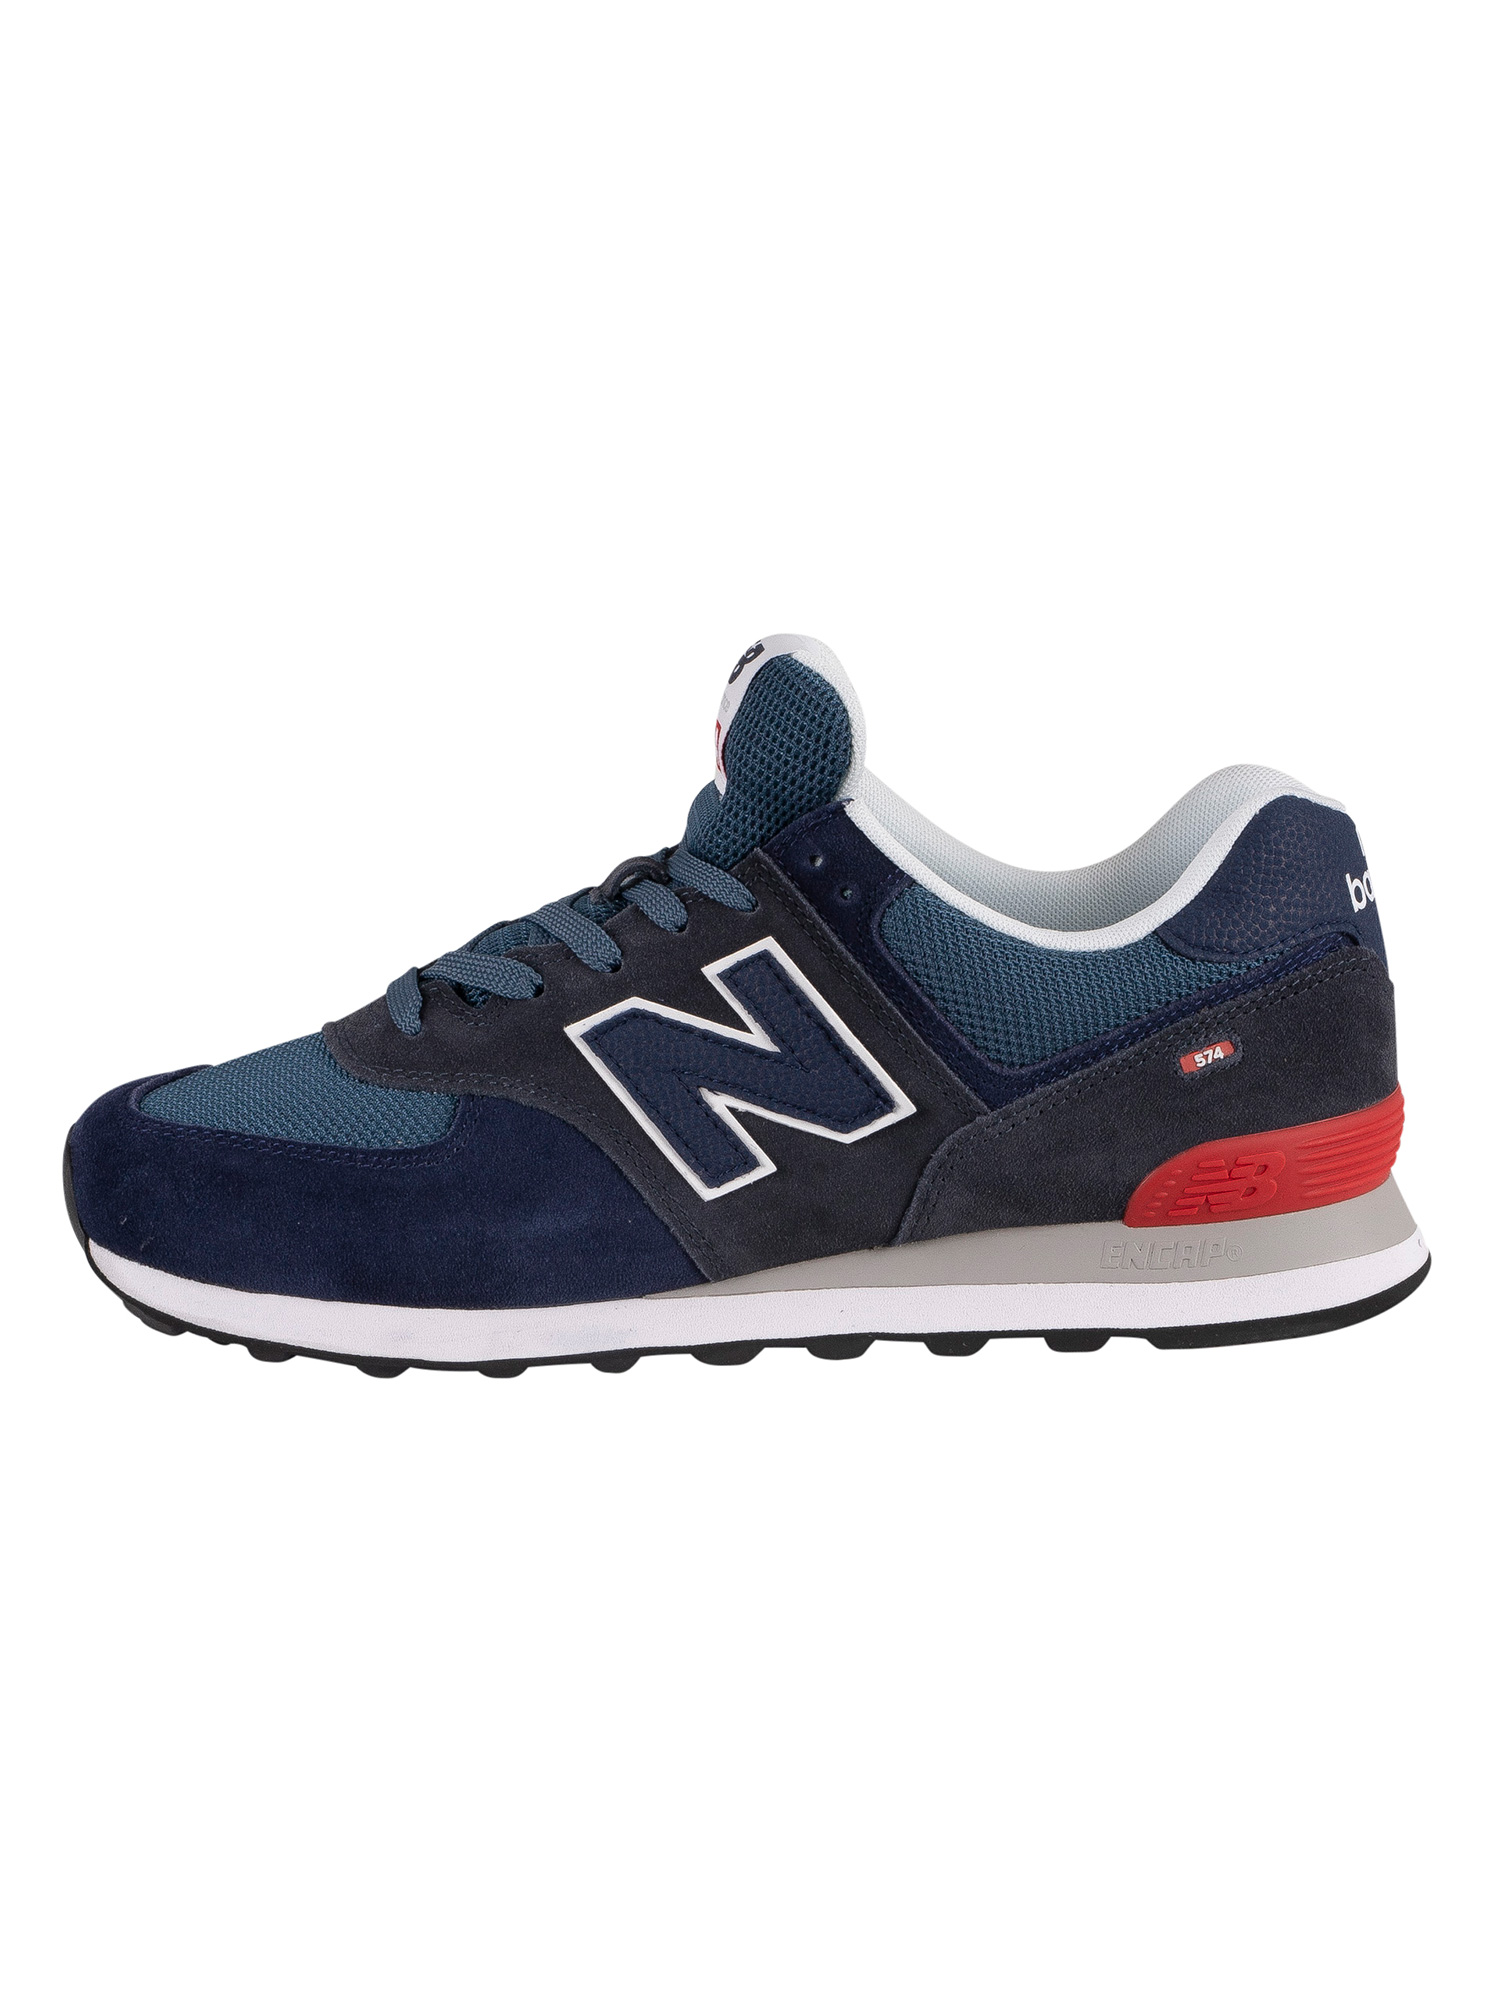 New Balance 574 Suede Trainers - Stone Blue/Outerspace | Standout